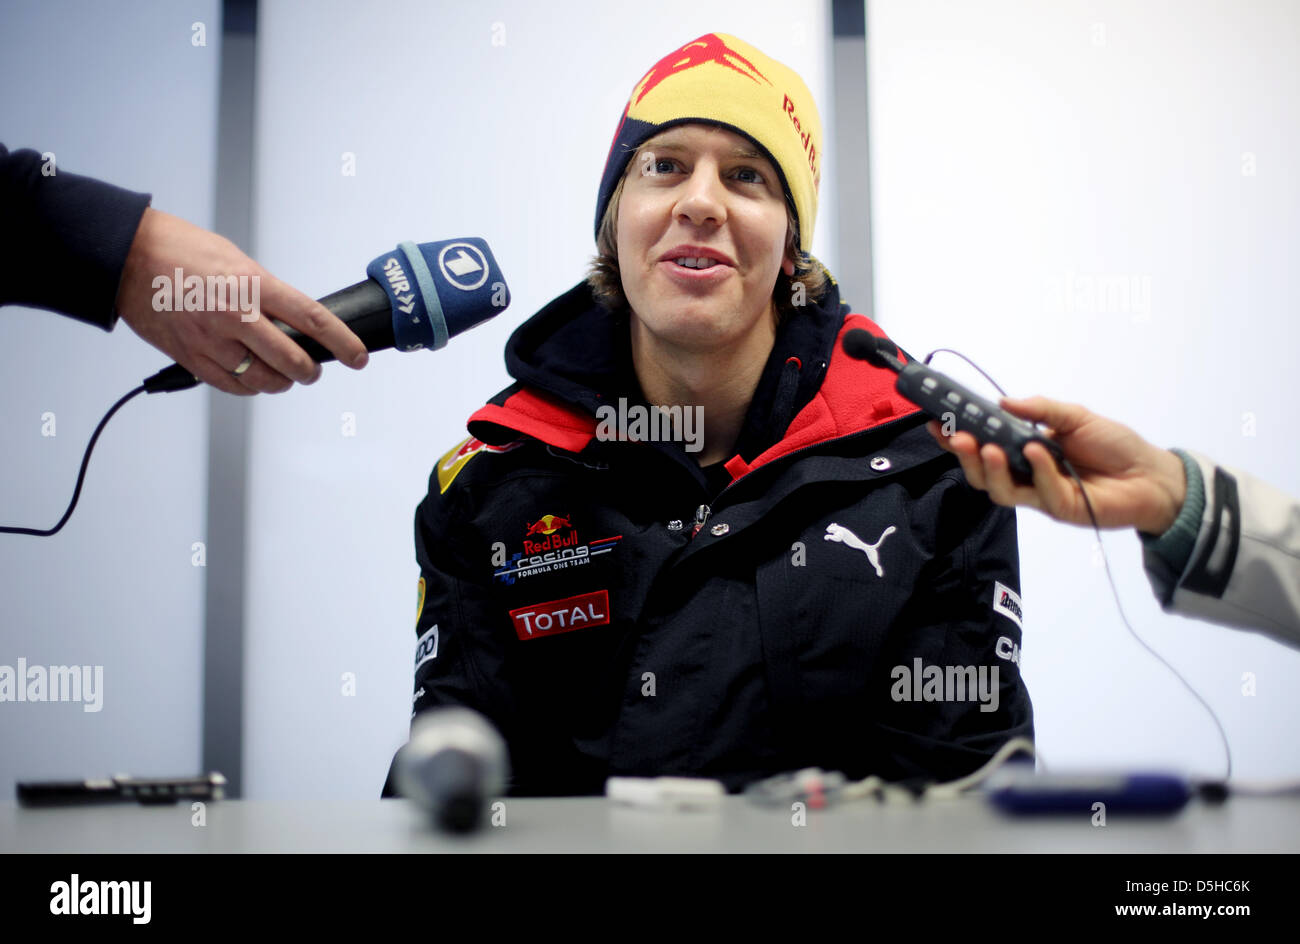 German Formula One driver Sebastian Vettel of Red Bull gives interviews at the presentation of the new Red Bull Racing race car RB6 in Jerez de la Frontera, Spain, 10 February 2010. Vice world champion Vettel will test the RB6 for the first time on 12 February 2010. The Formula One 2010 season will start on 14 March 2010 in Bahrain. Photo: Felix Heyder Stock Photo